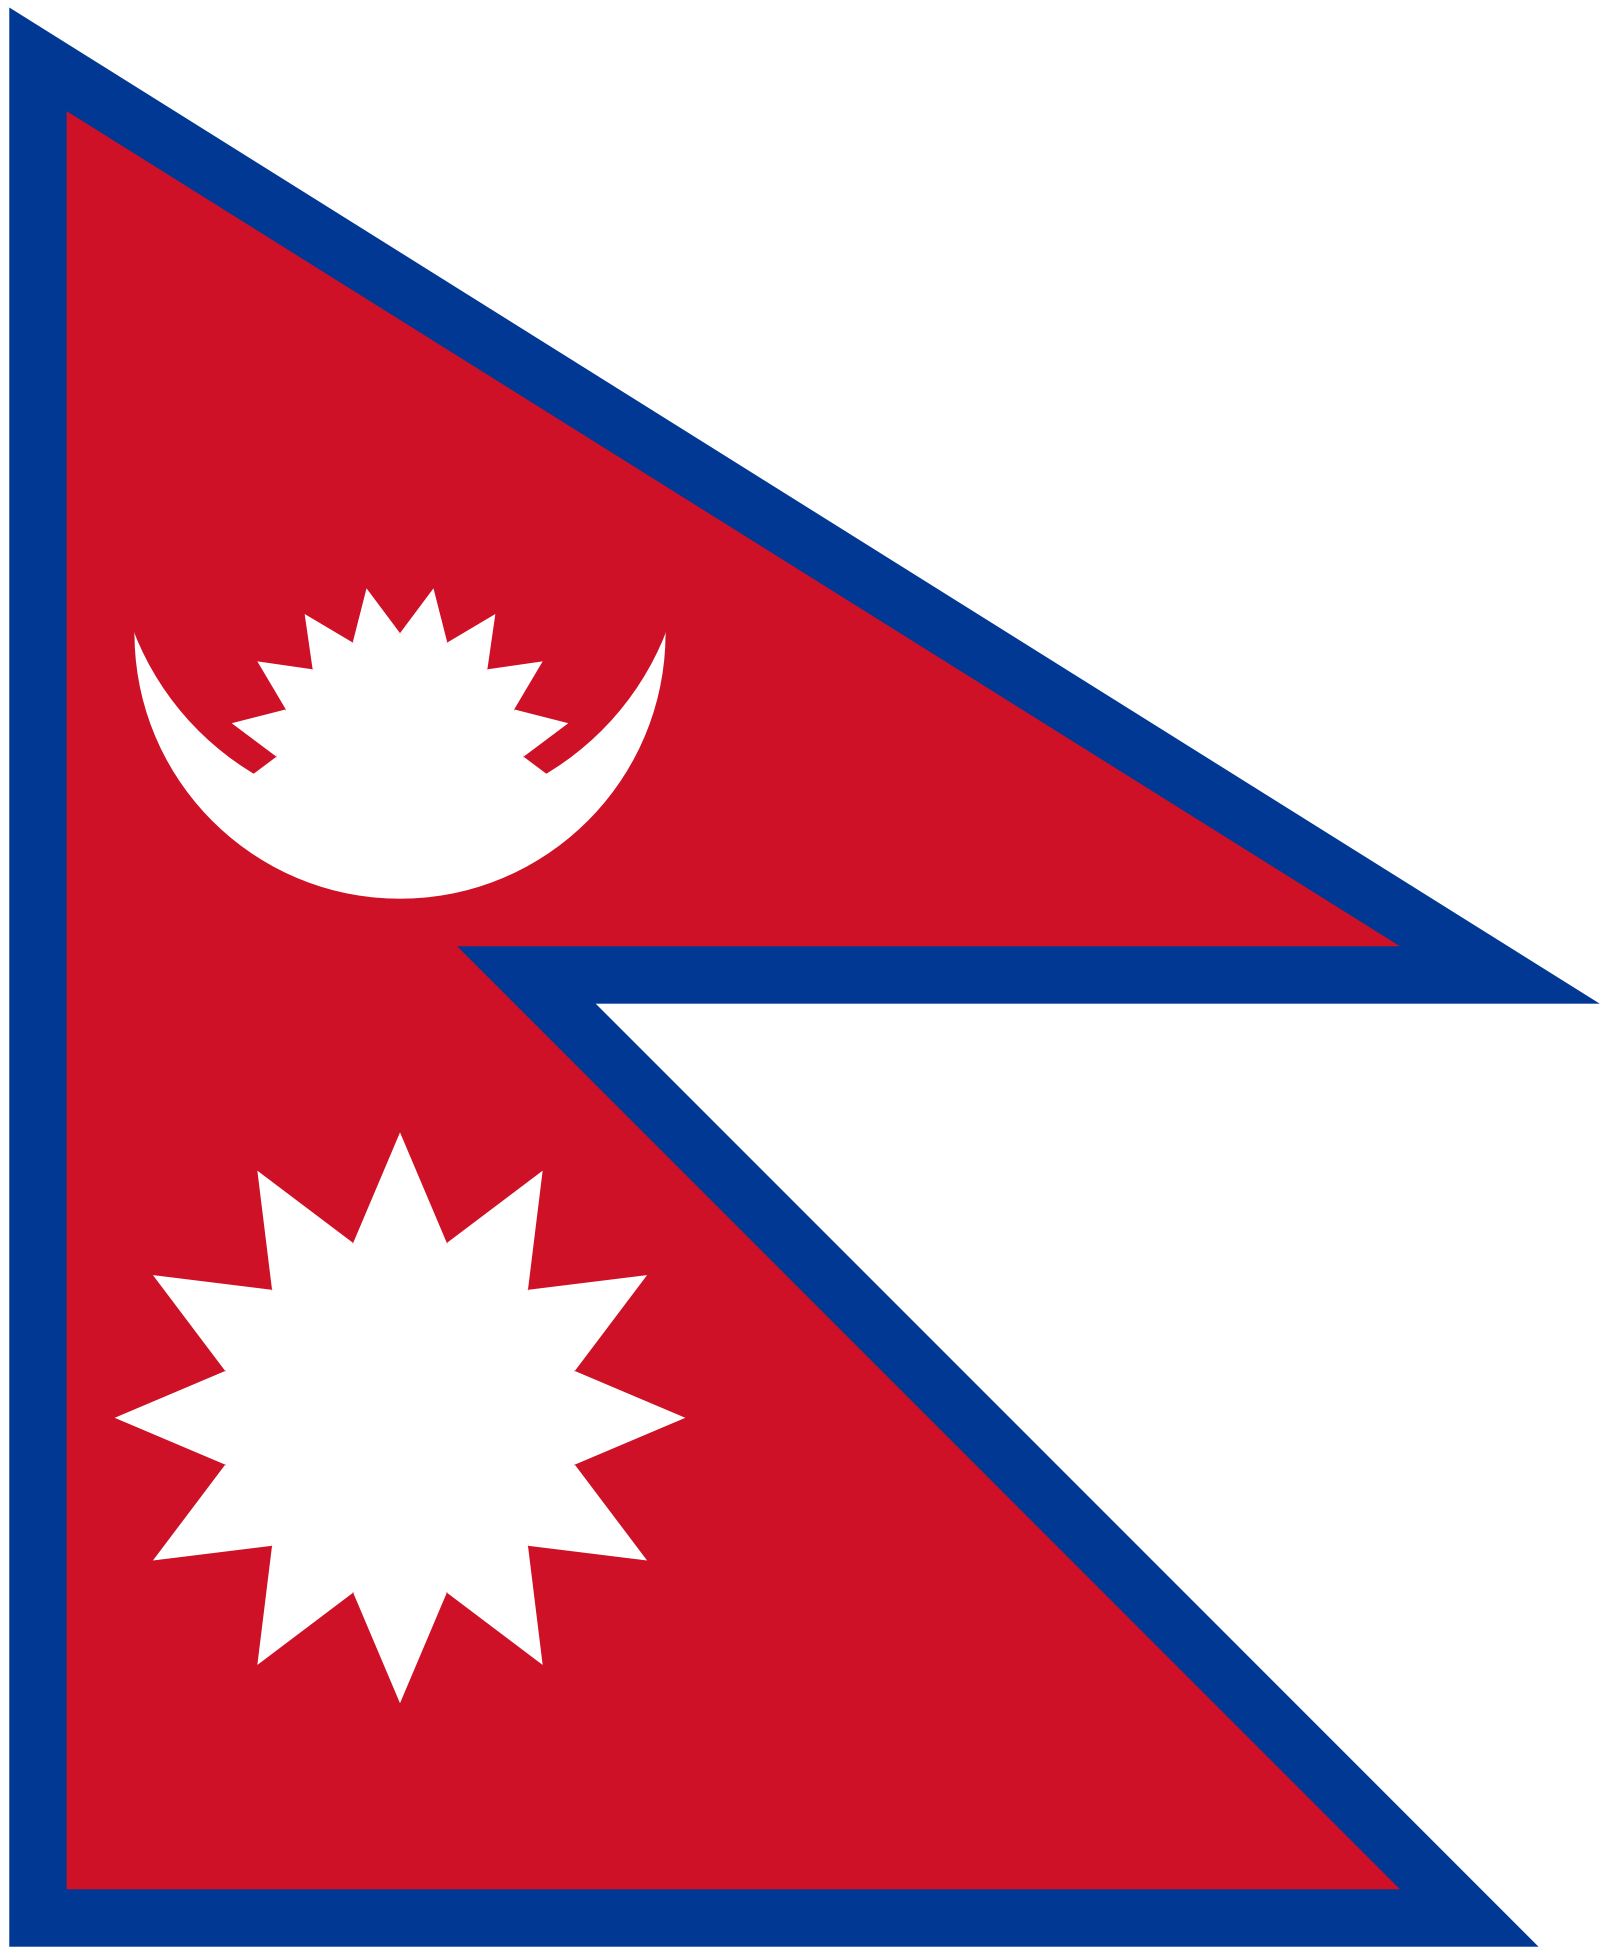 2 Red Triangles Logo - Nepal | Flags of countries